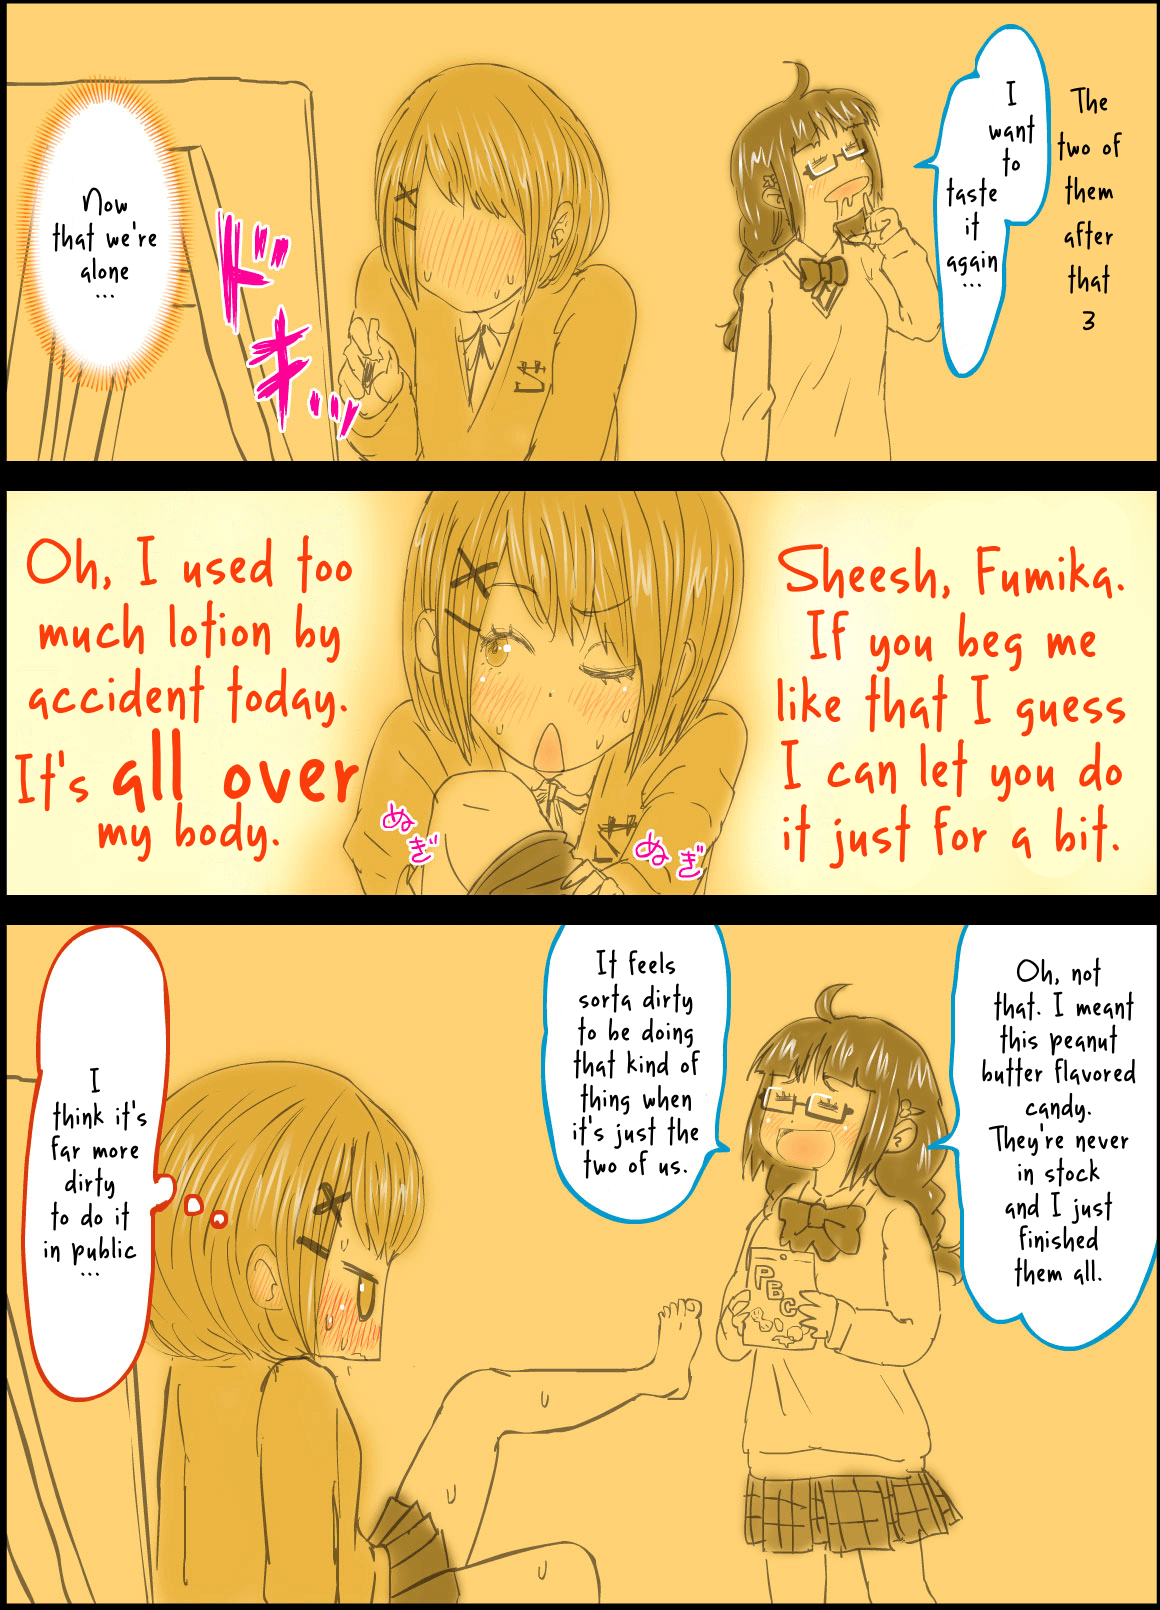 [Homura Hinase] Peanut Butter Lotion -After Days- [English] [Yuri-ism] [保村日生] Peanut Butter Lotion -After Days- [英訳]